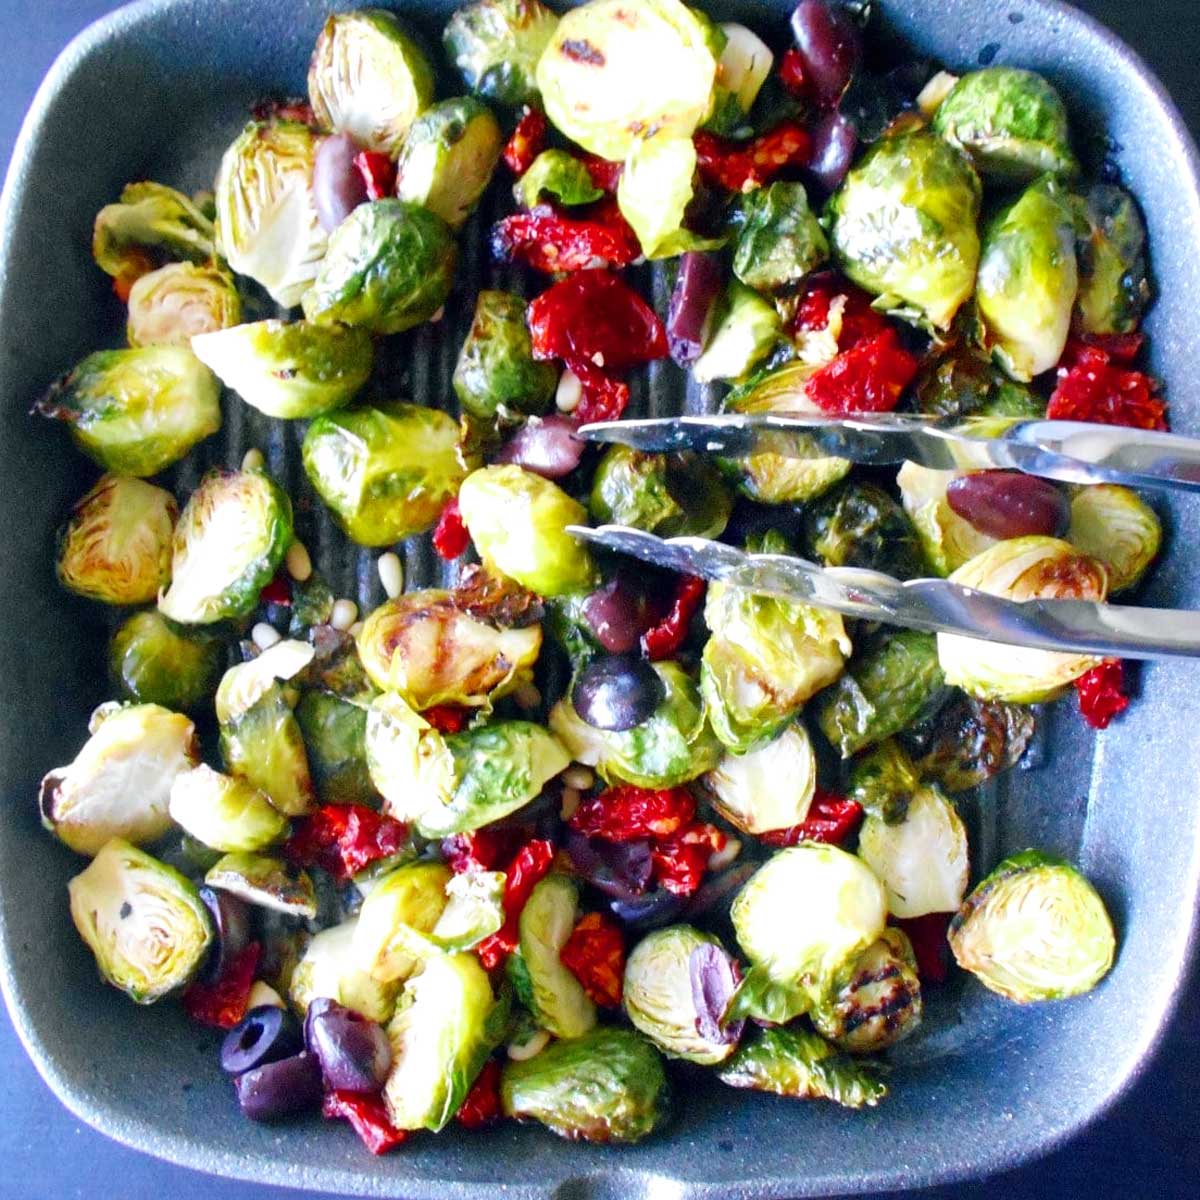 Top view of cooked Mediterranean Brussels sprouts in a grey square skillet.